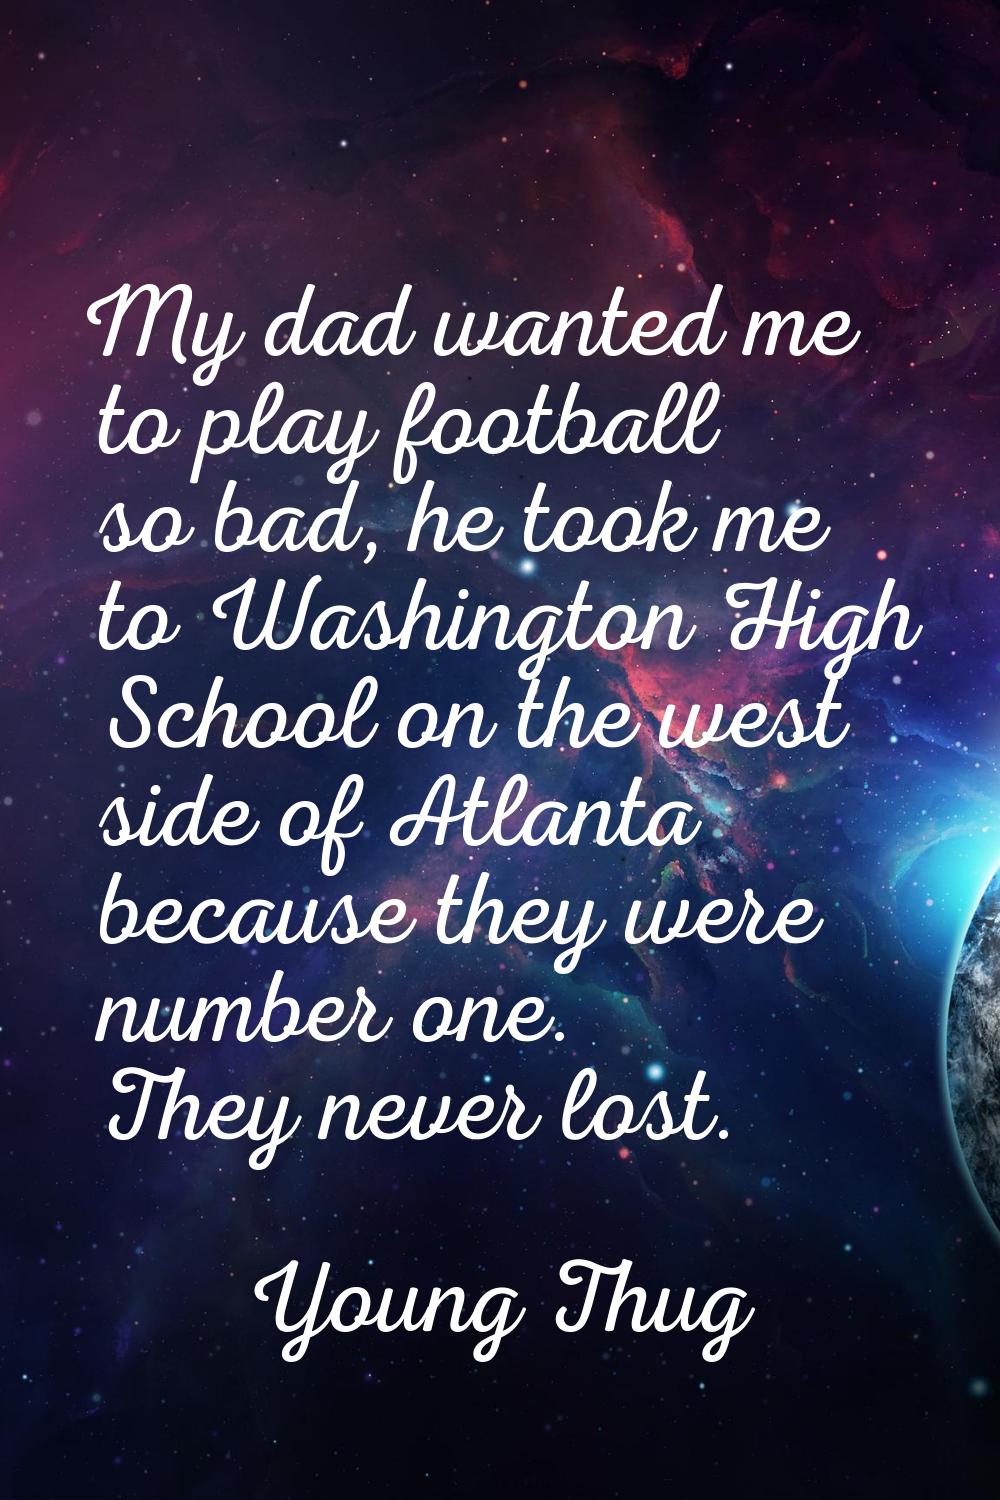 My dad wanted me to play football so bad, he took me to Washington High School on the west side of 